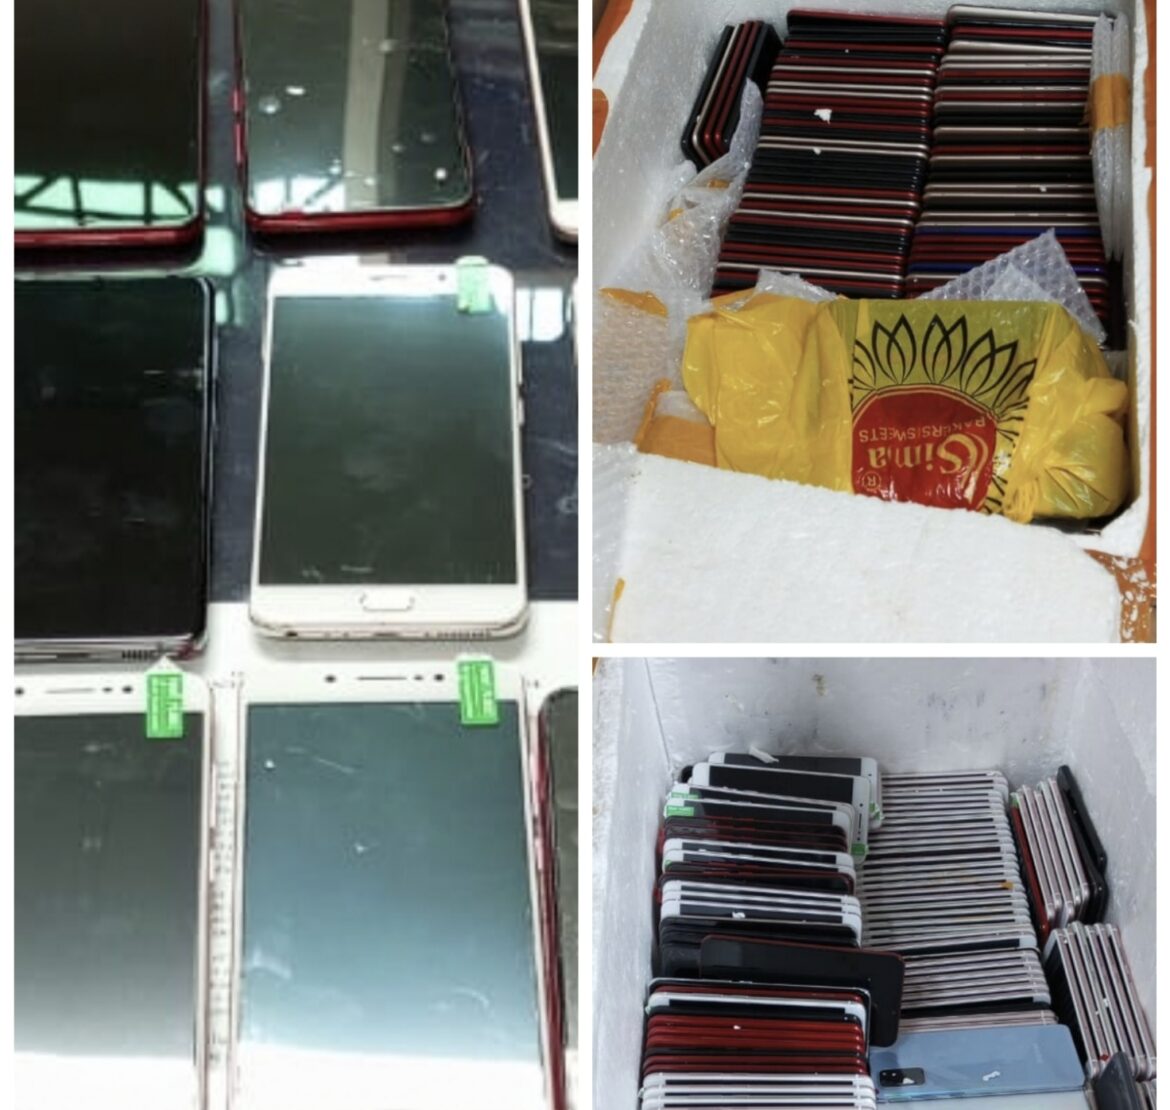 MCC Islamabad seizes smuggled smart phones and smart watches worth Rs.50 million